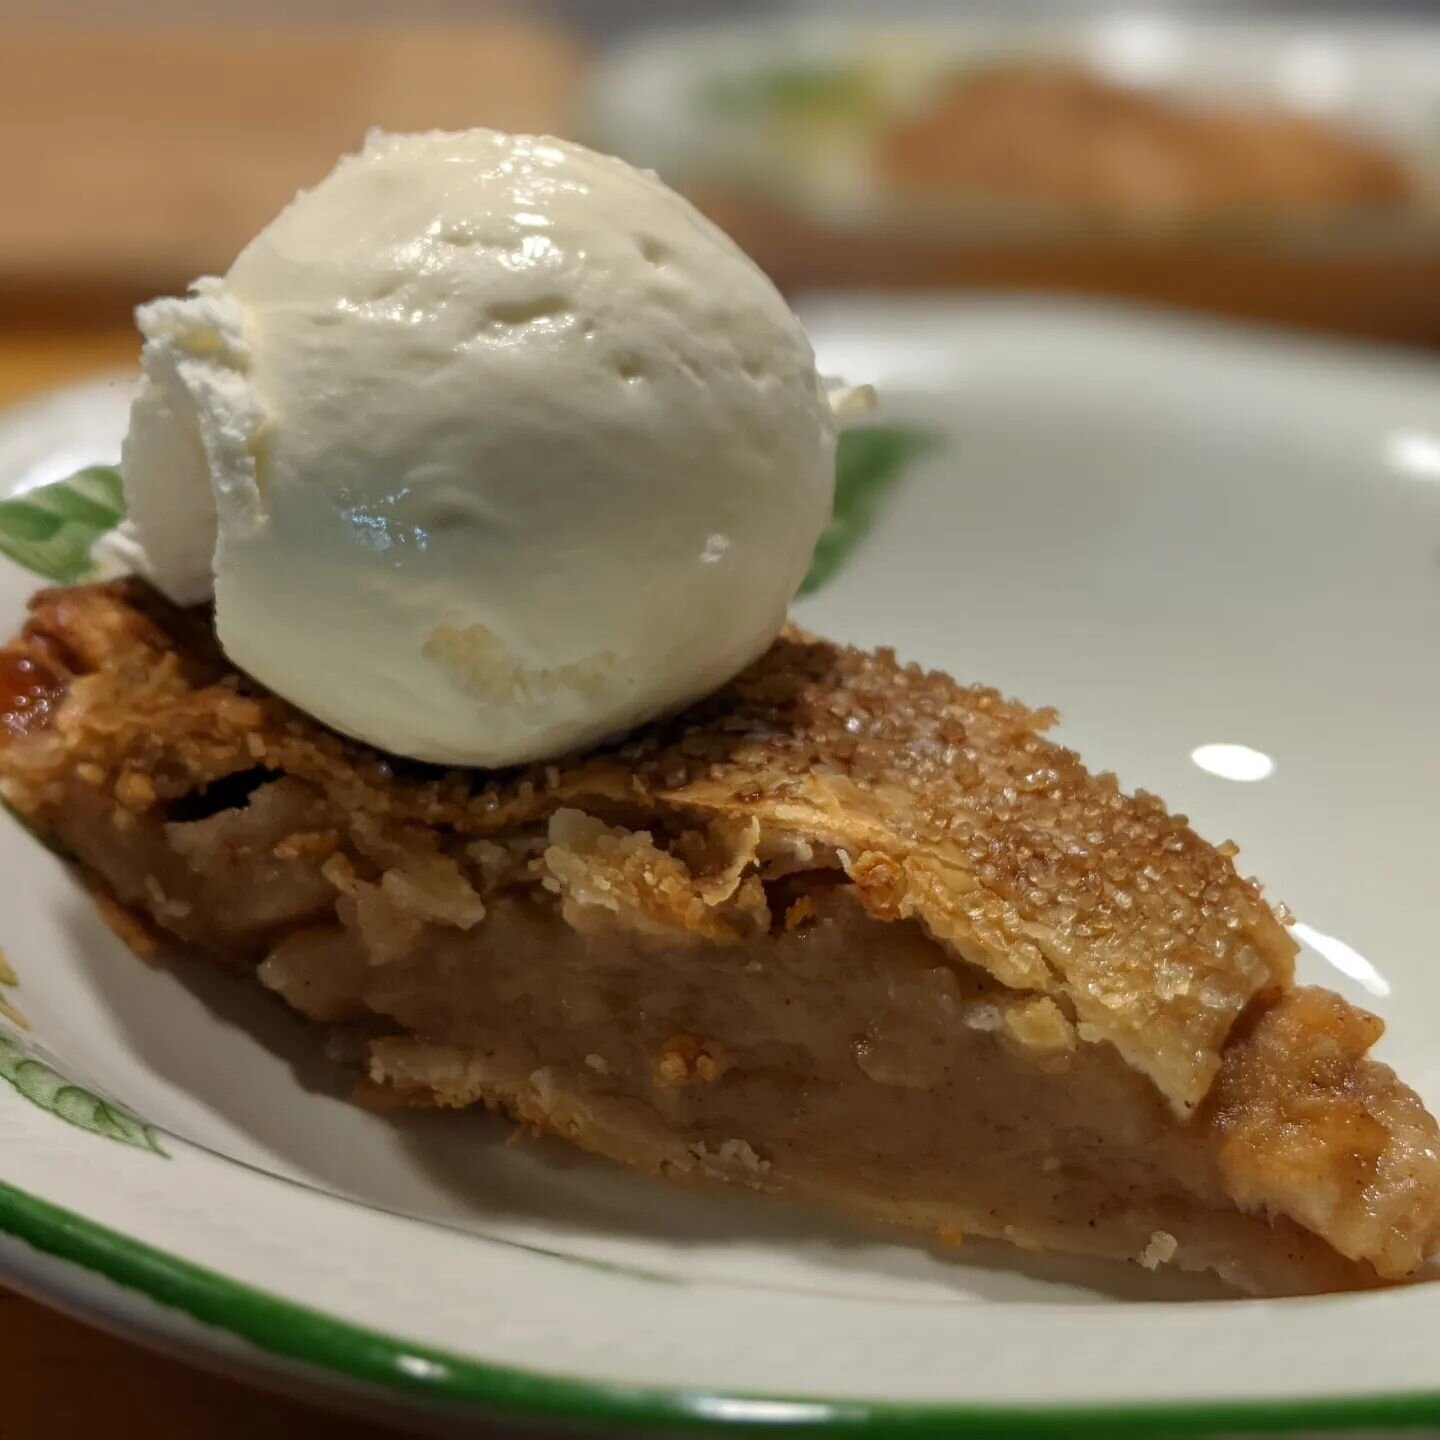 Every morning I say I'm going to go out for a jog and I never do.

It's a running joke.

📸: @wyattswickedgoods scratch-made apple pie with vanilla ice cream

#getthegoods #applepie #icecream #dessert #running #runningjoke #newhampshire #newhampshire